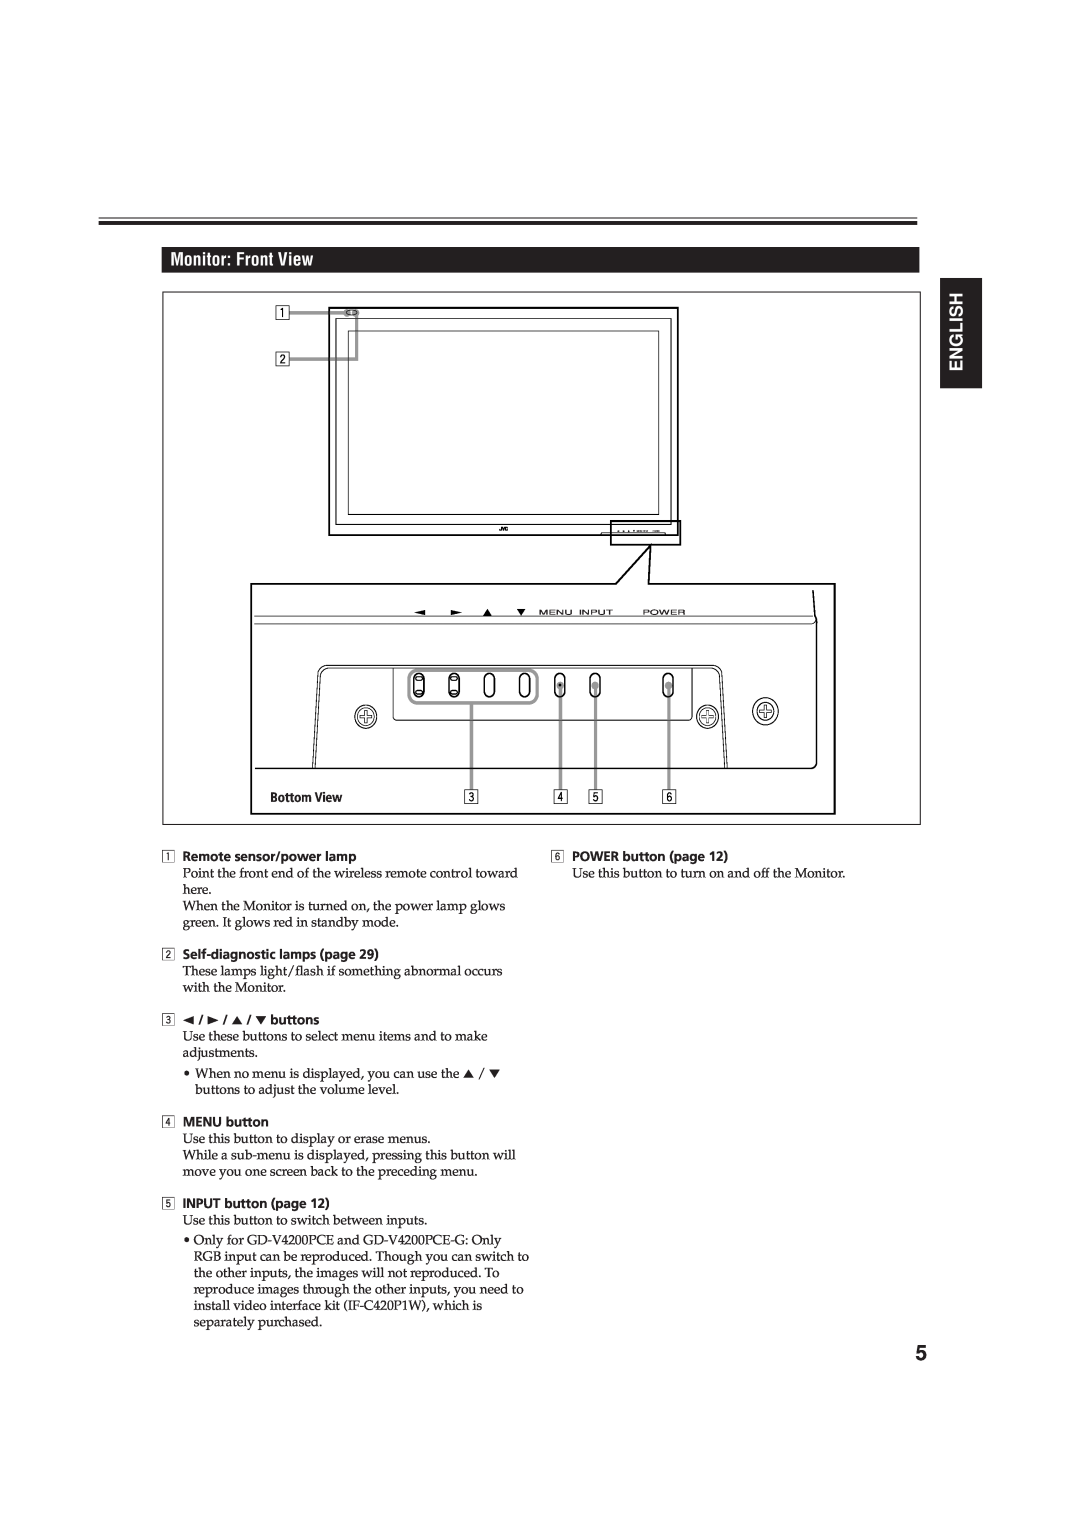 JVC GD-V4200PZW-G Monitor Front View, English, Remote sensor/power lamp, Self-diagnostic lamps page, 3 2 / 3 / 5 / buttons 